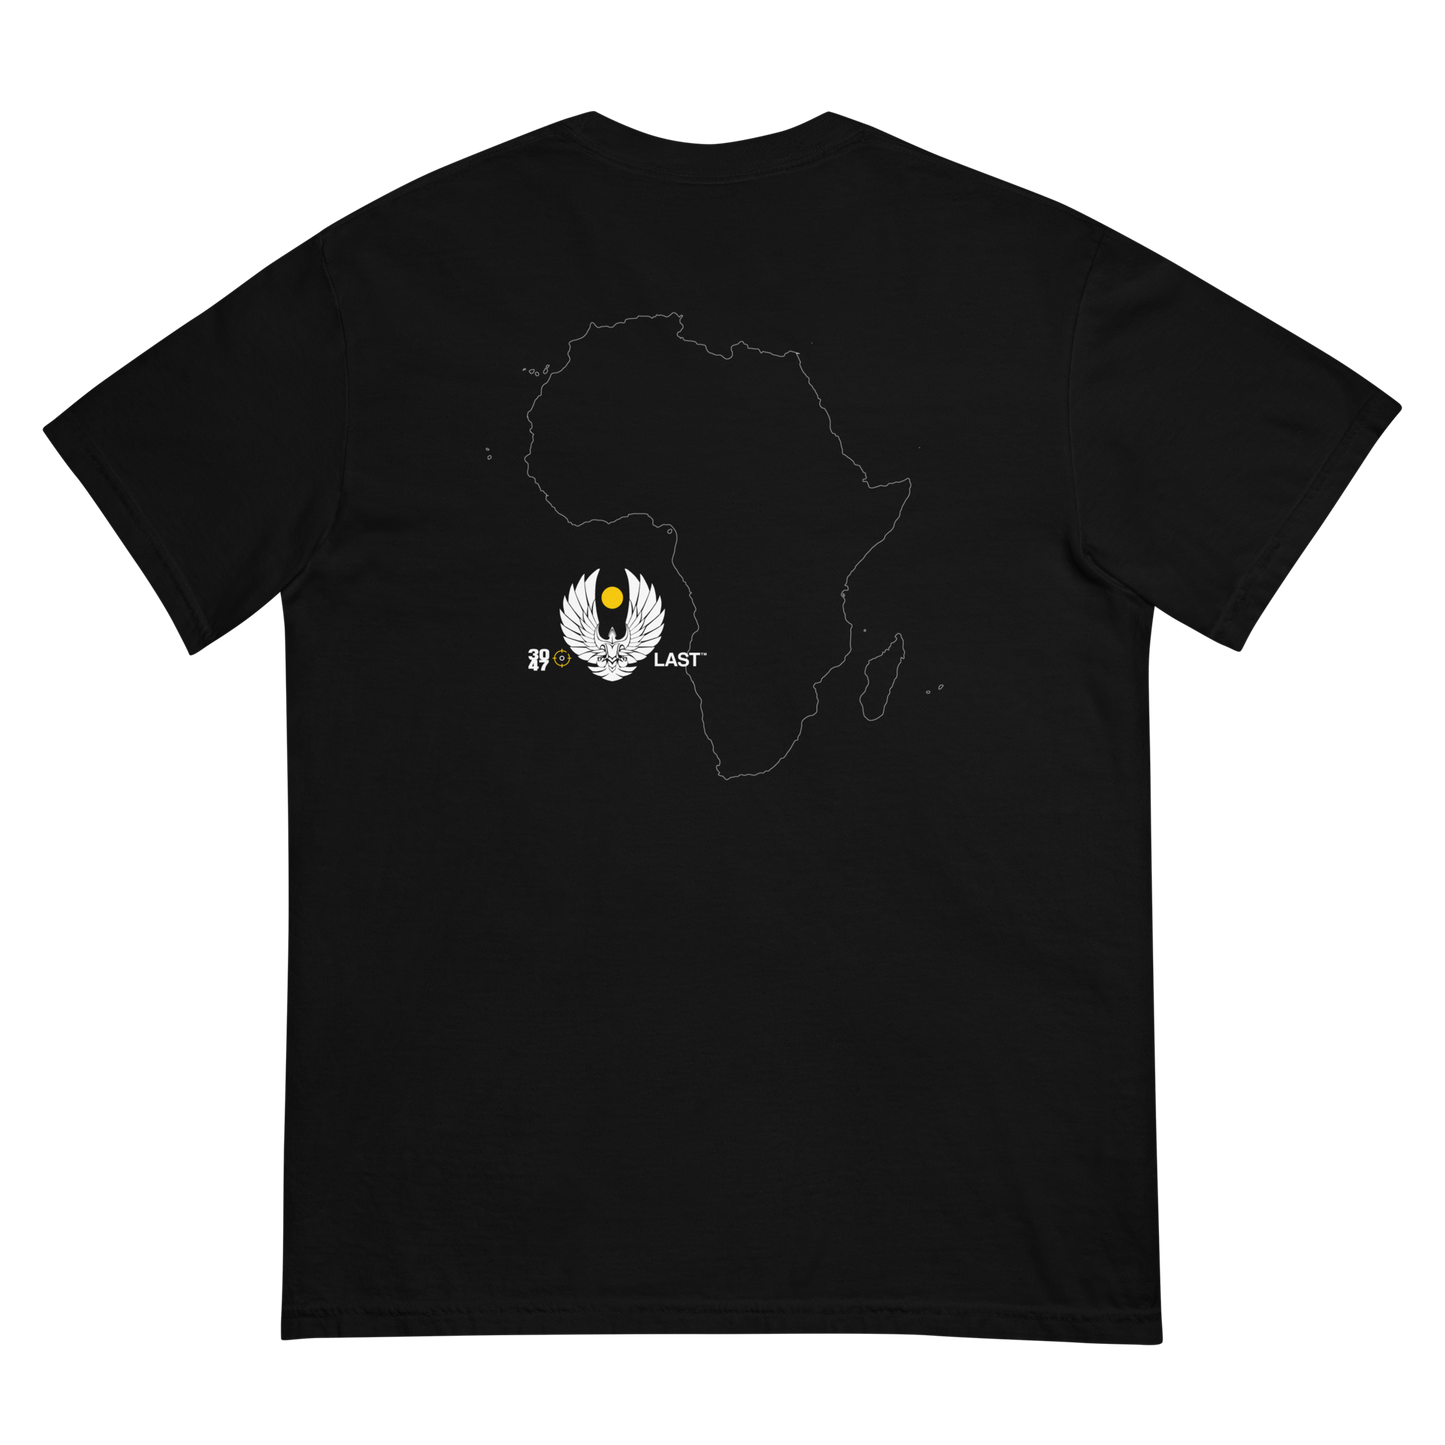 LAST x AFRO WORLD CUP garment-dyed heavy T